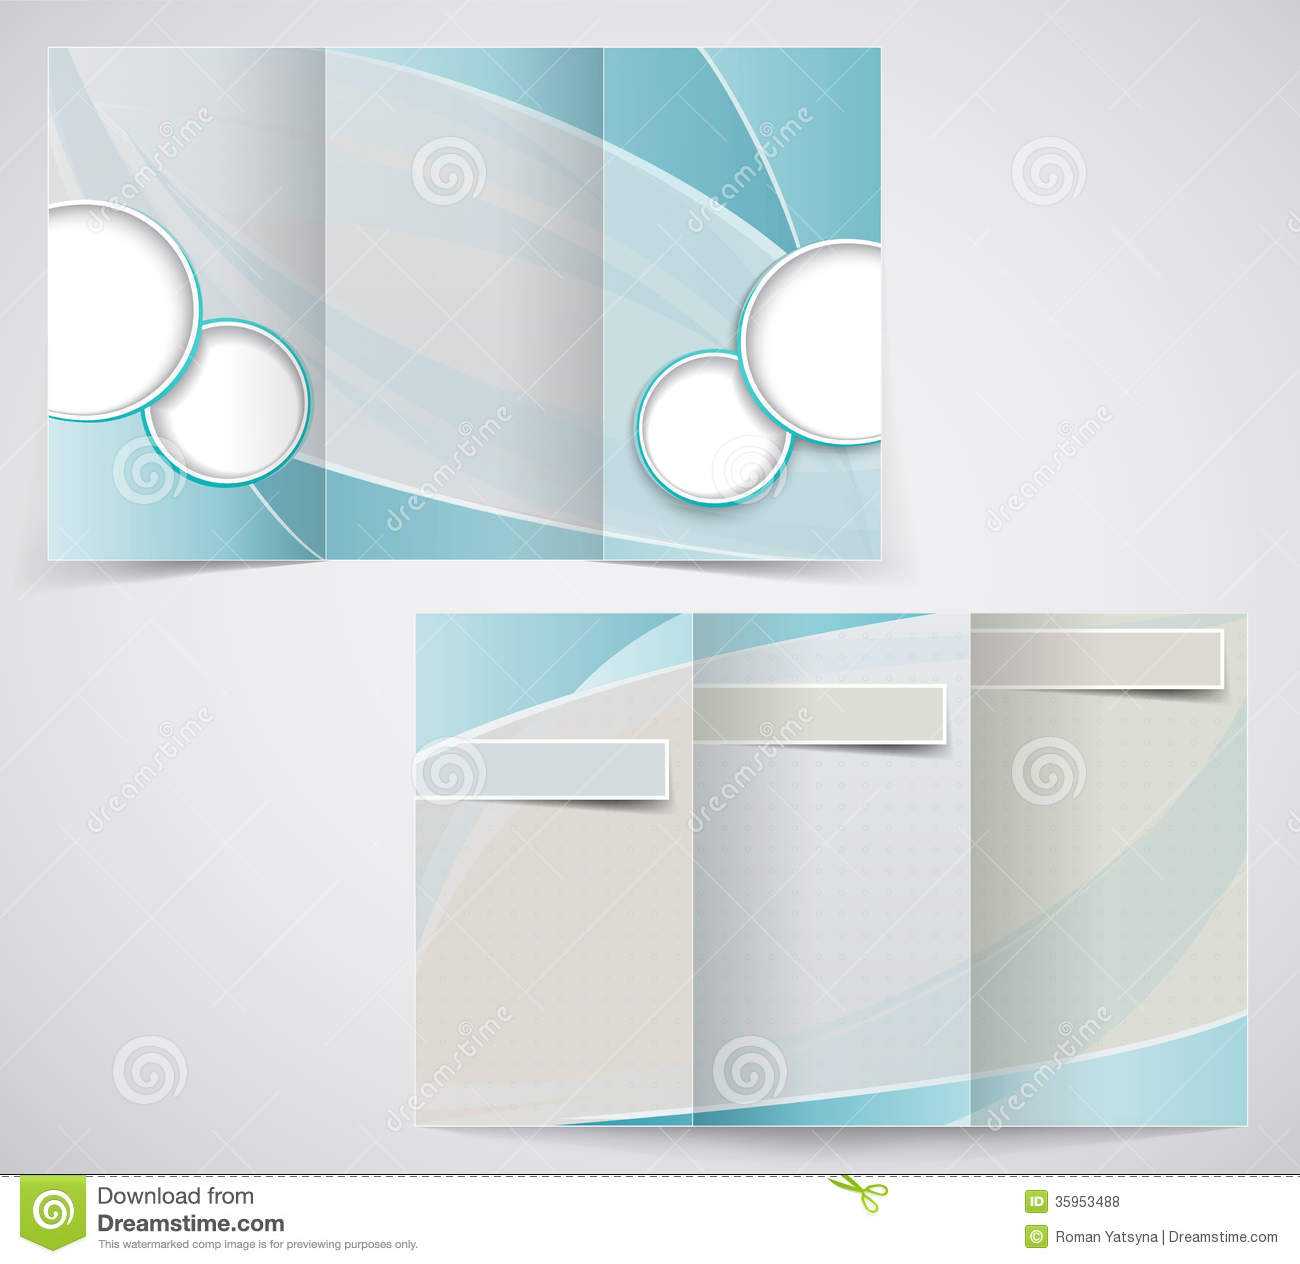 Tri Fold Business Brochure Template, Vector Blue D Stock Intended For Free Tri Fold Business Brochure Templates